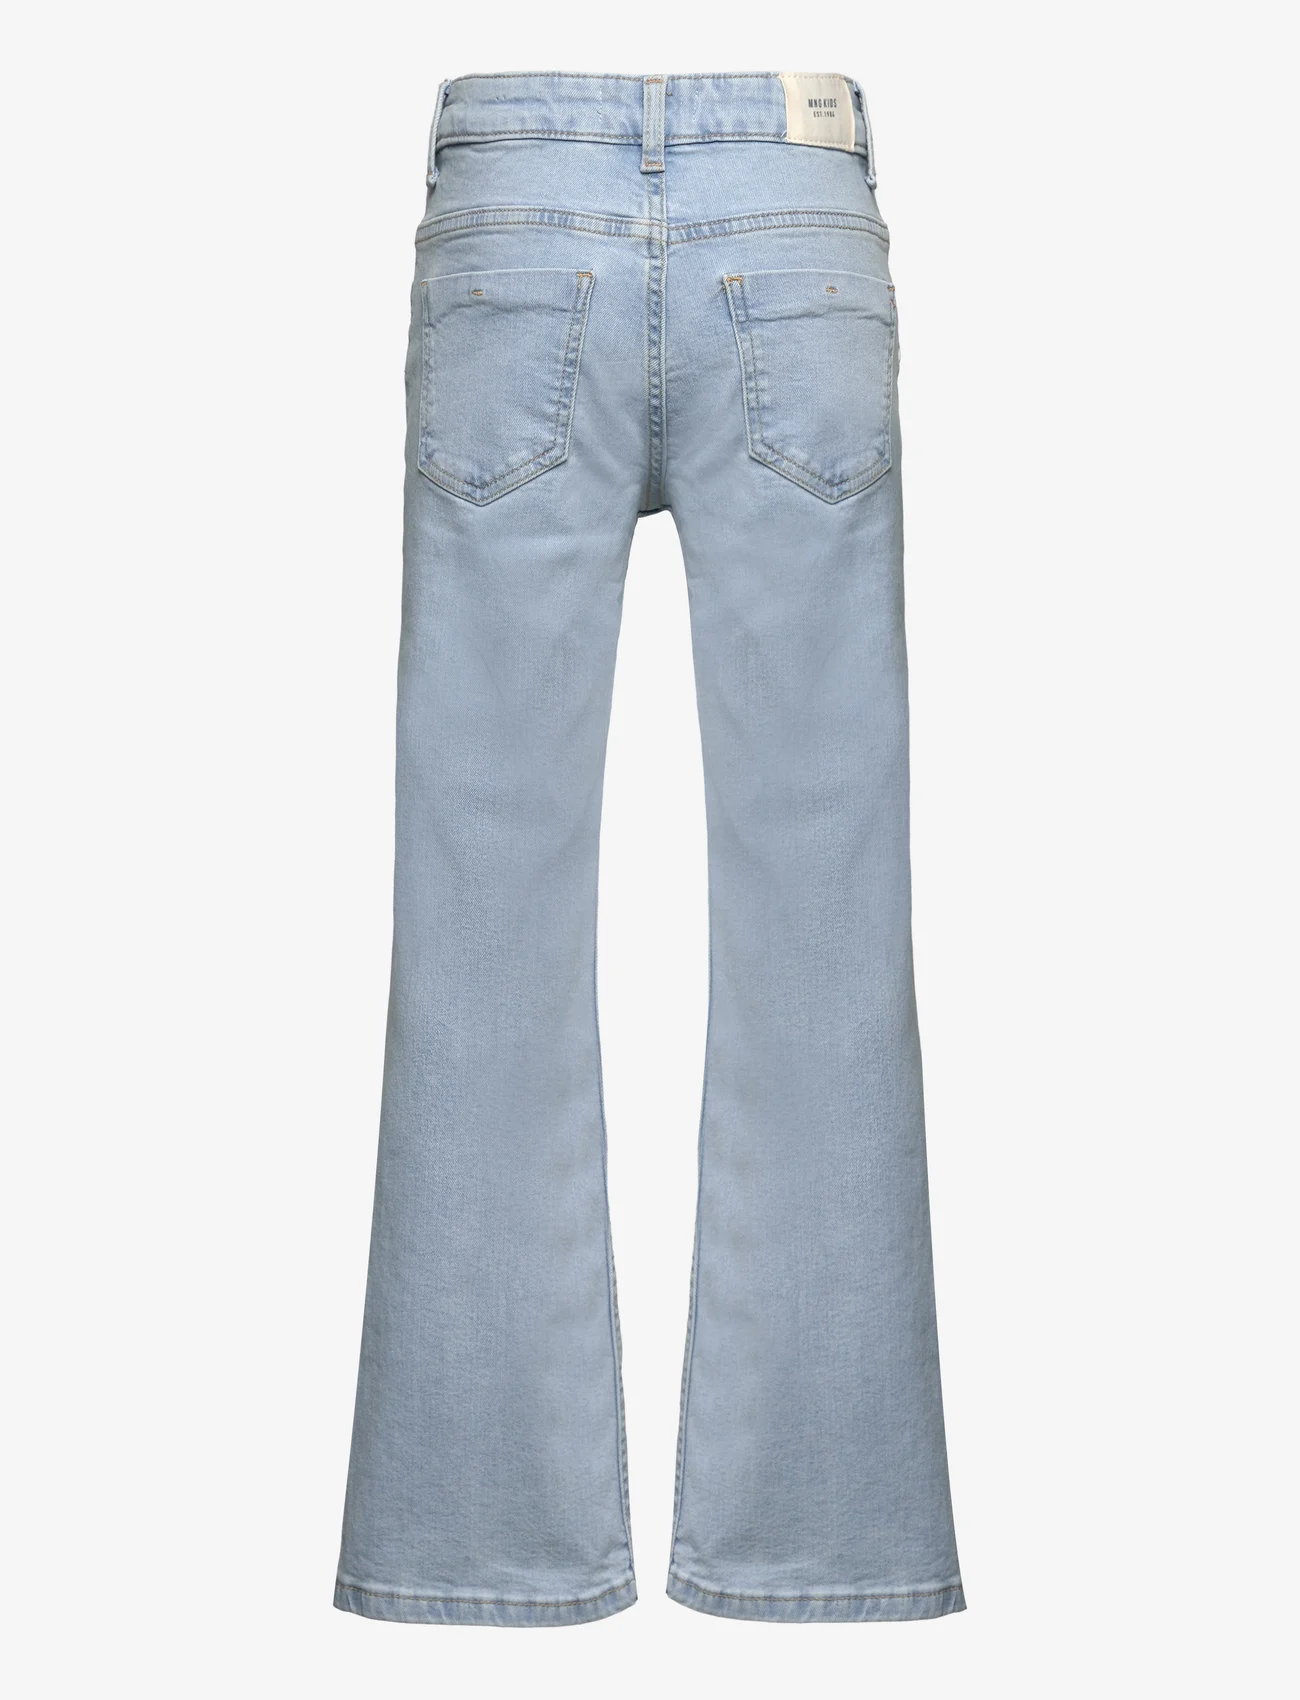 Mango - Buttons flare jeans - bootcut jeans - open blue - 1